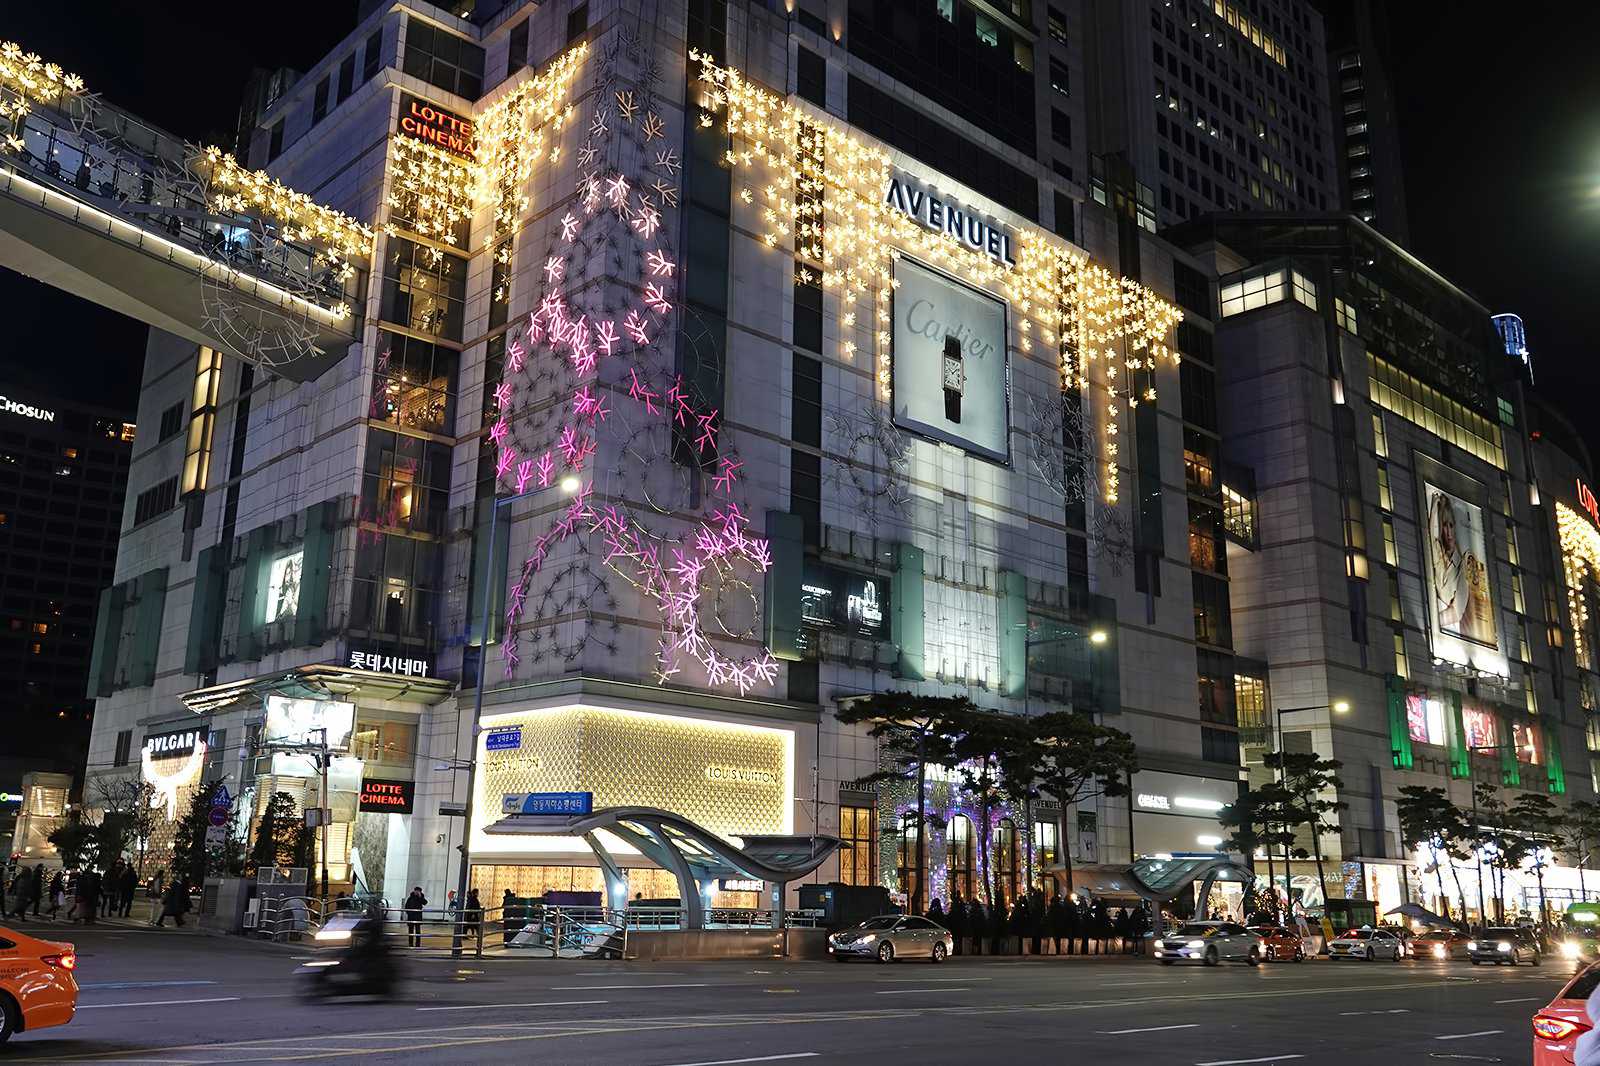 Lotte Department Store Myeongdong